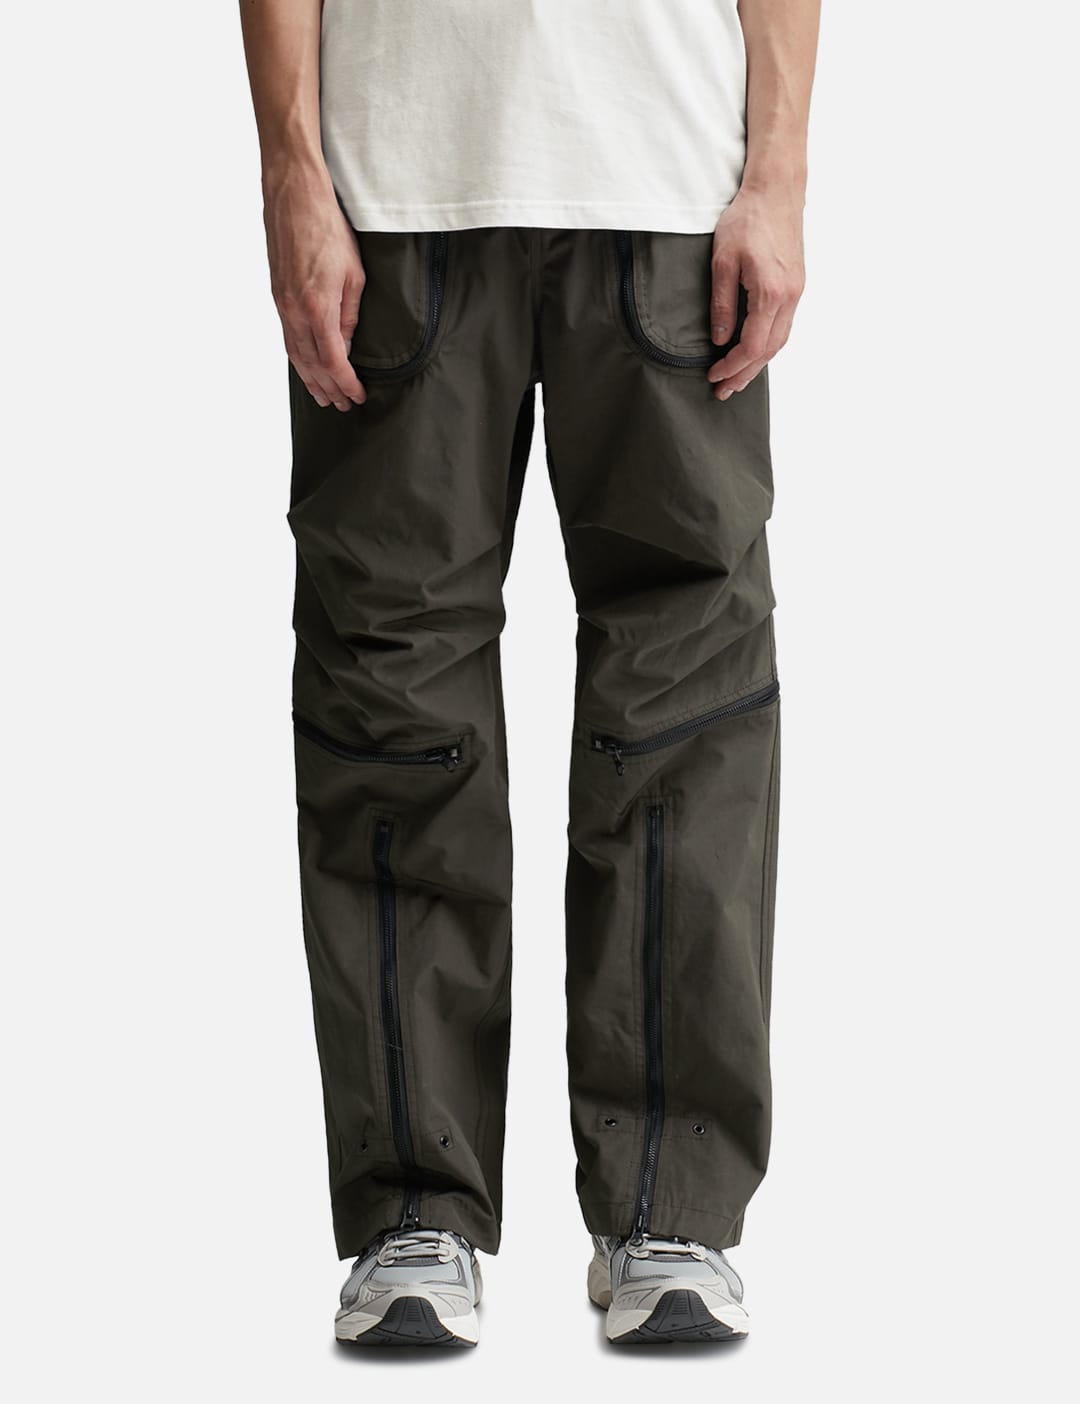 GRAILZ - AFV Cargo Pants | HBX - Globally Curated Fashion and